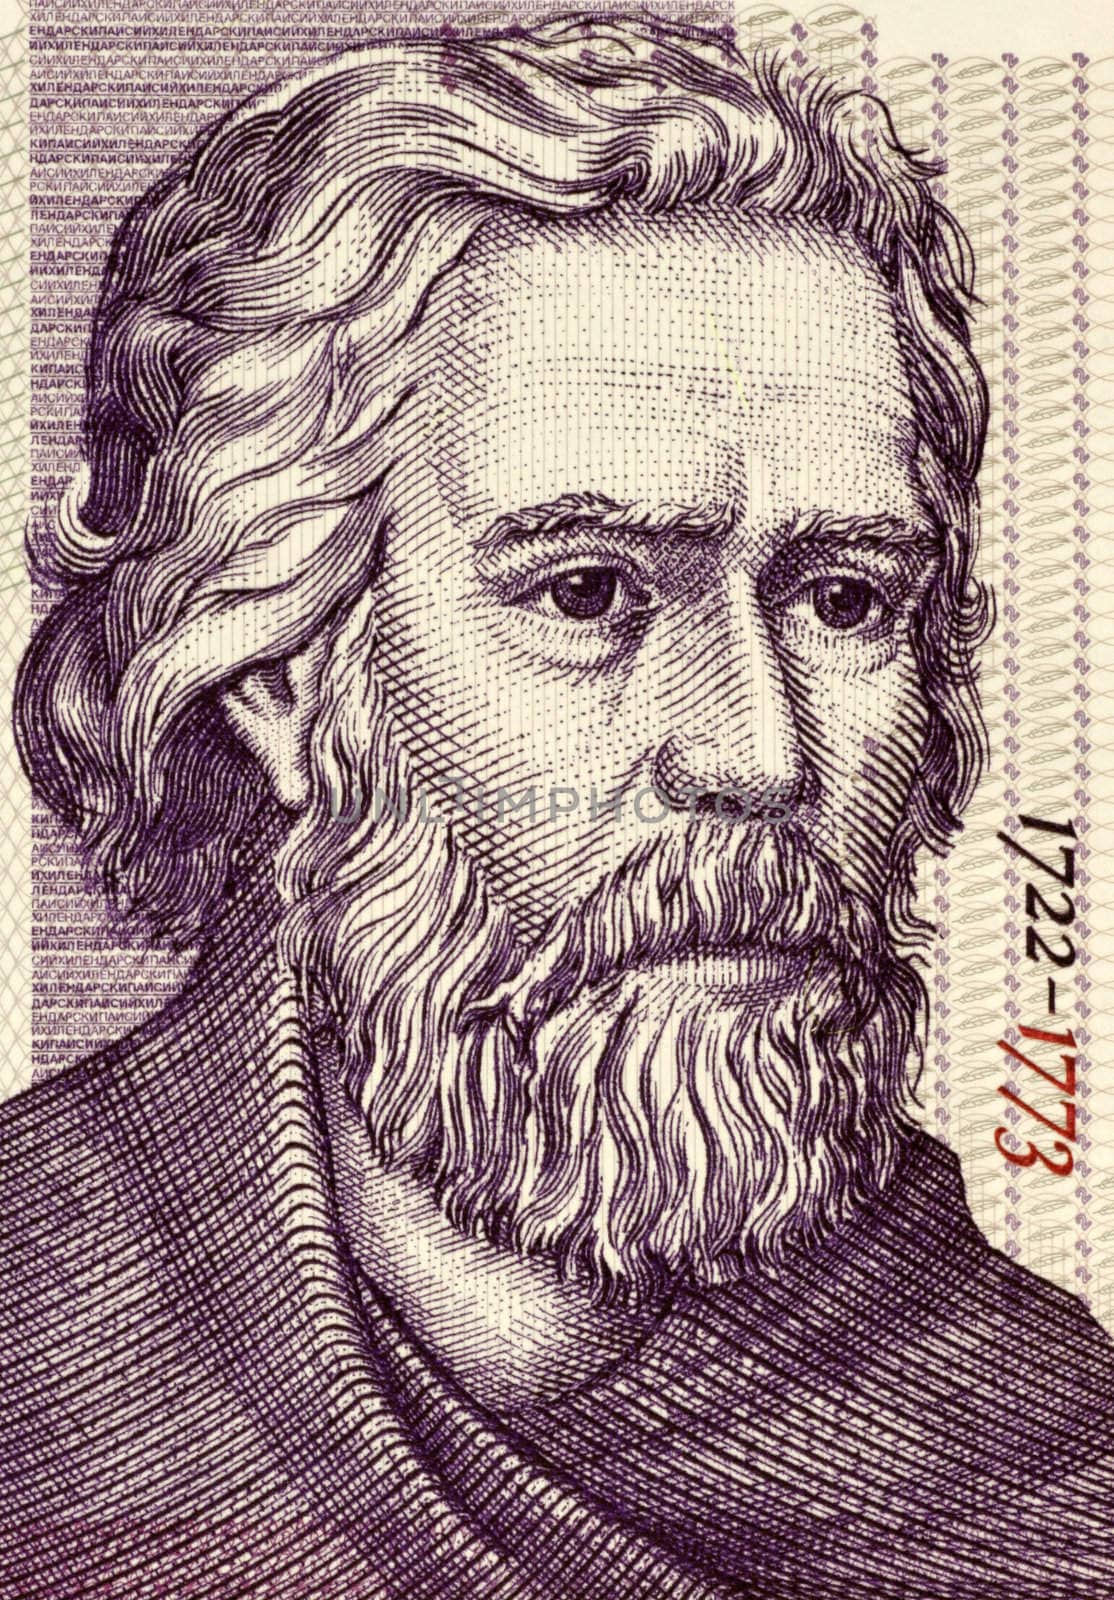 Paisius of Hilendar (1722-1773) on 2 Leva 2005 Banknote from Bulgaria. Bulgarian clergyman who played a key role in the Bulgarian National Revival.